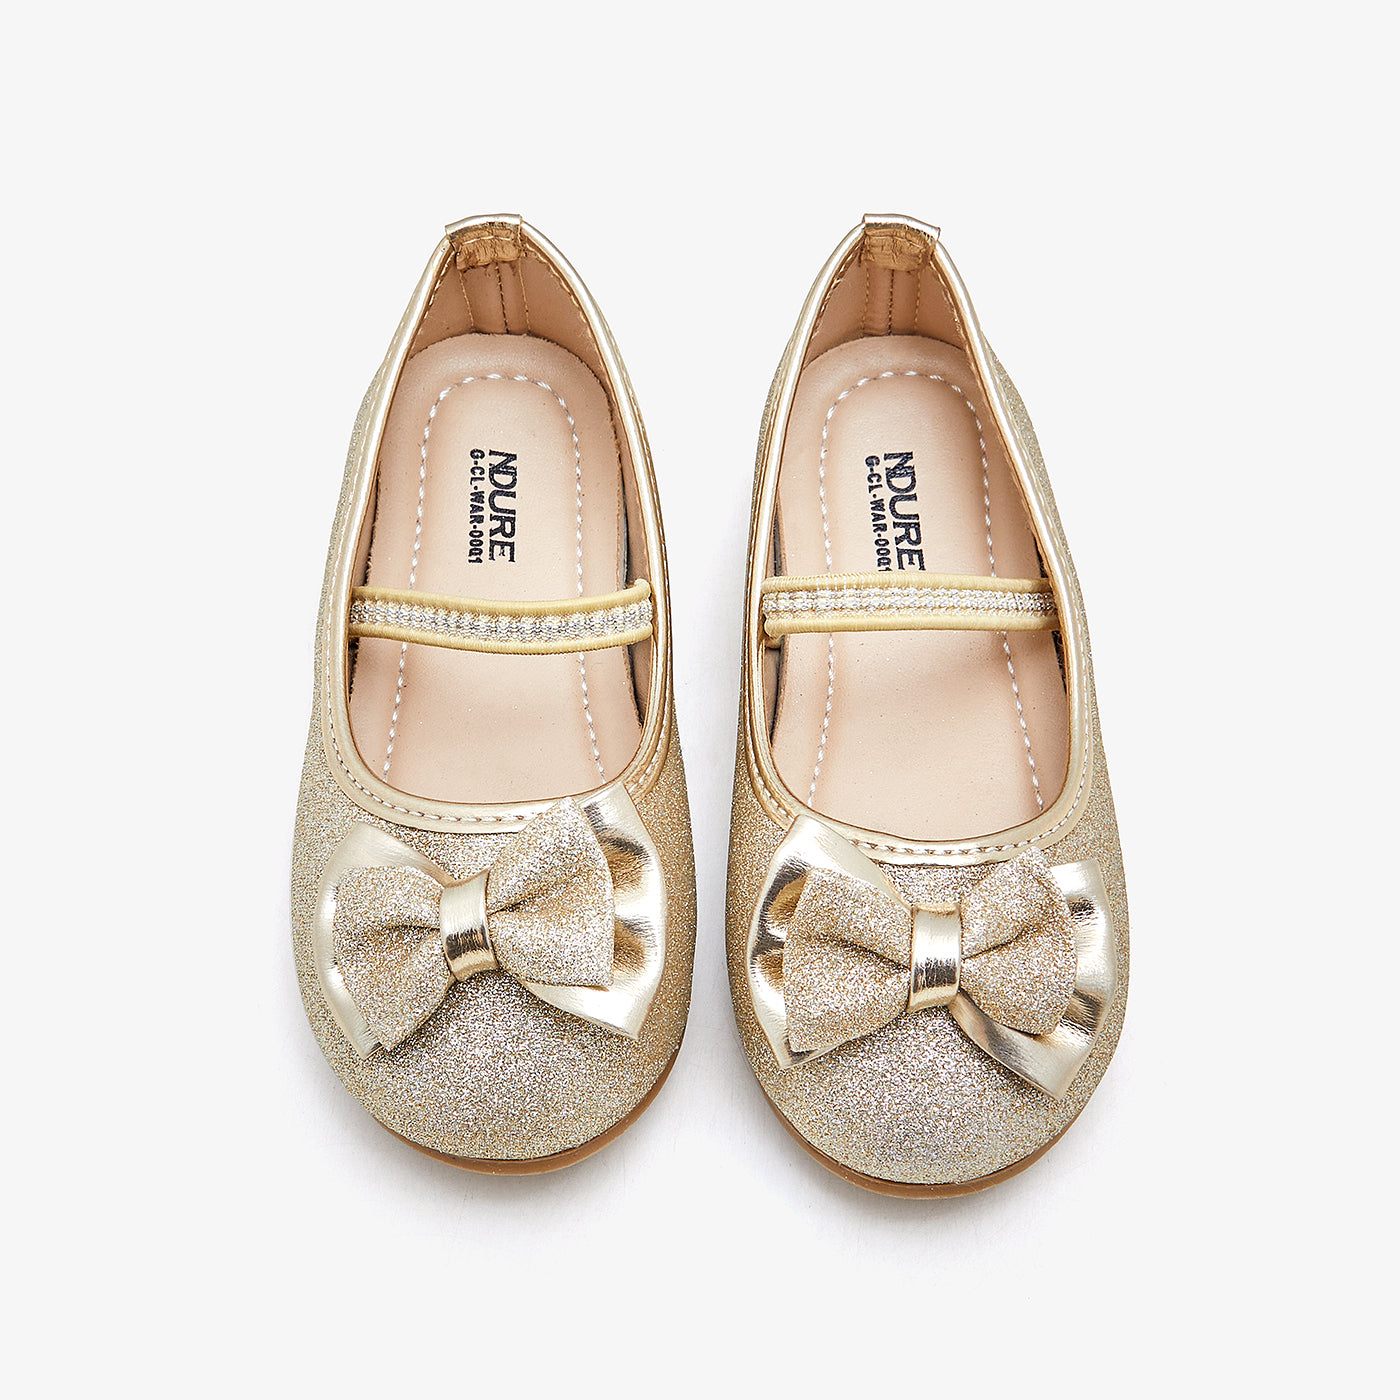 Girls Ballet Flats with Bow